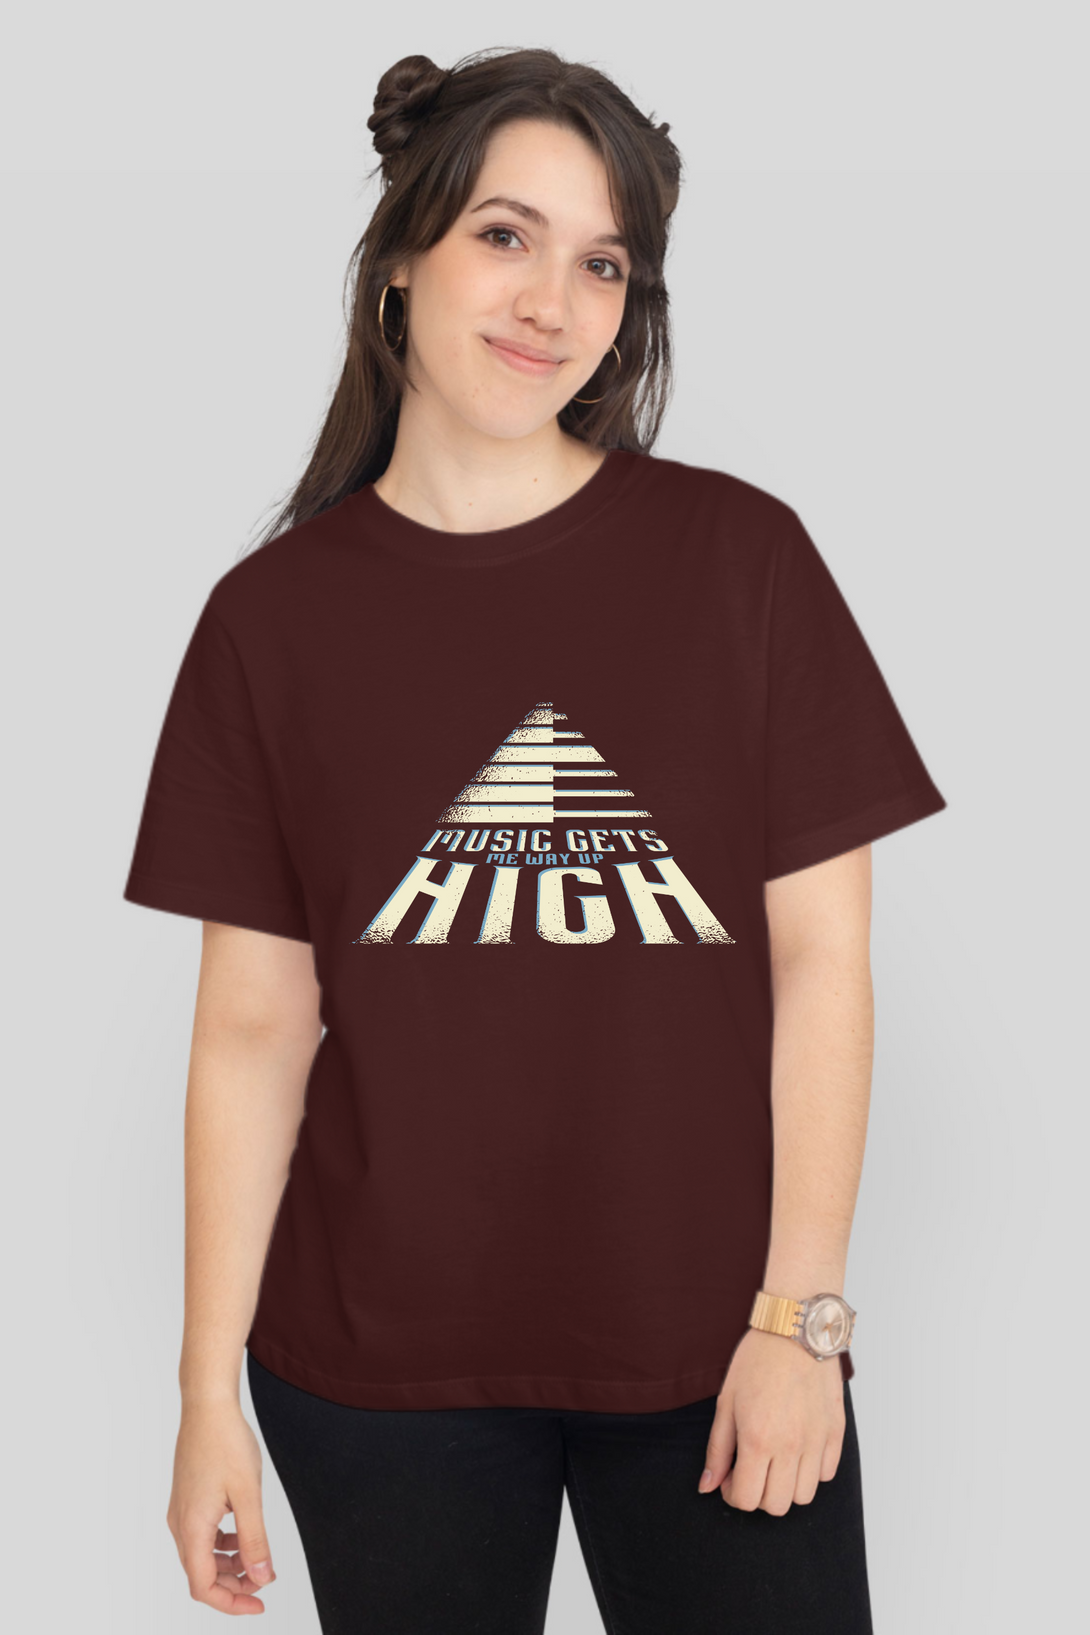 Music Gets Me Way Up High Printed T-Shirt For Women - WowWaves - 14